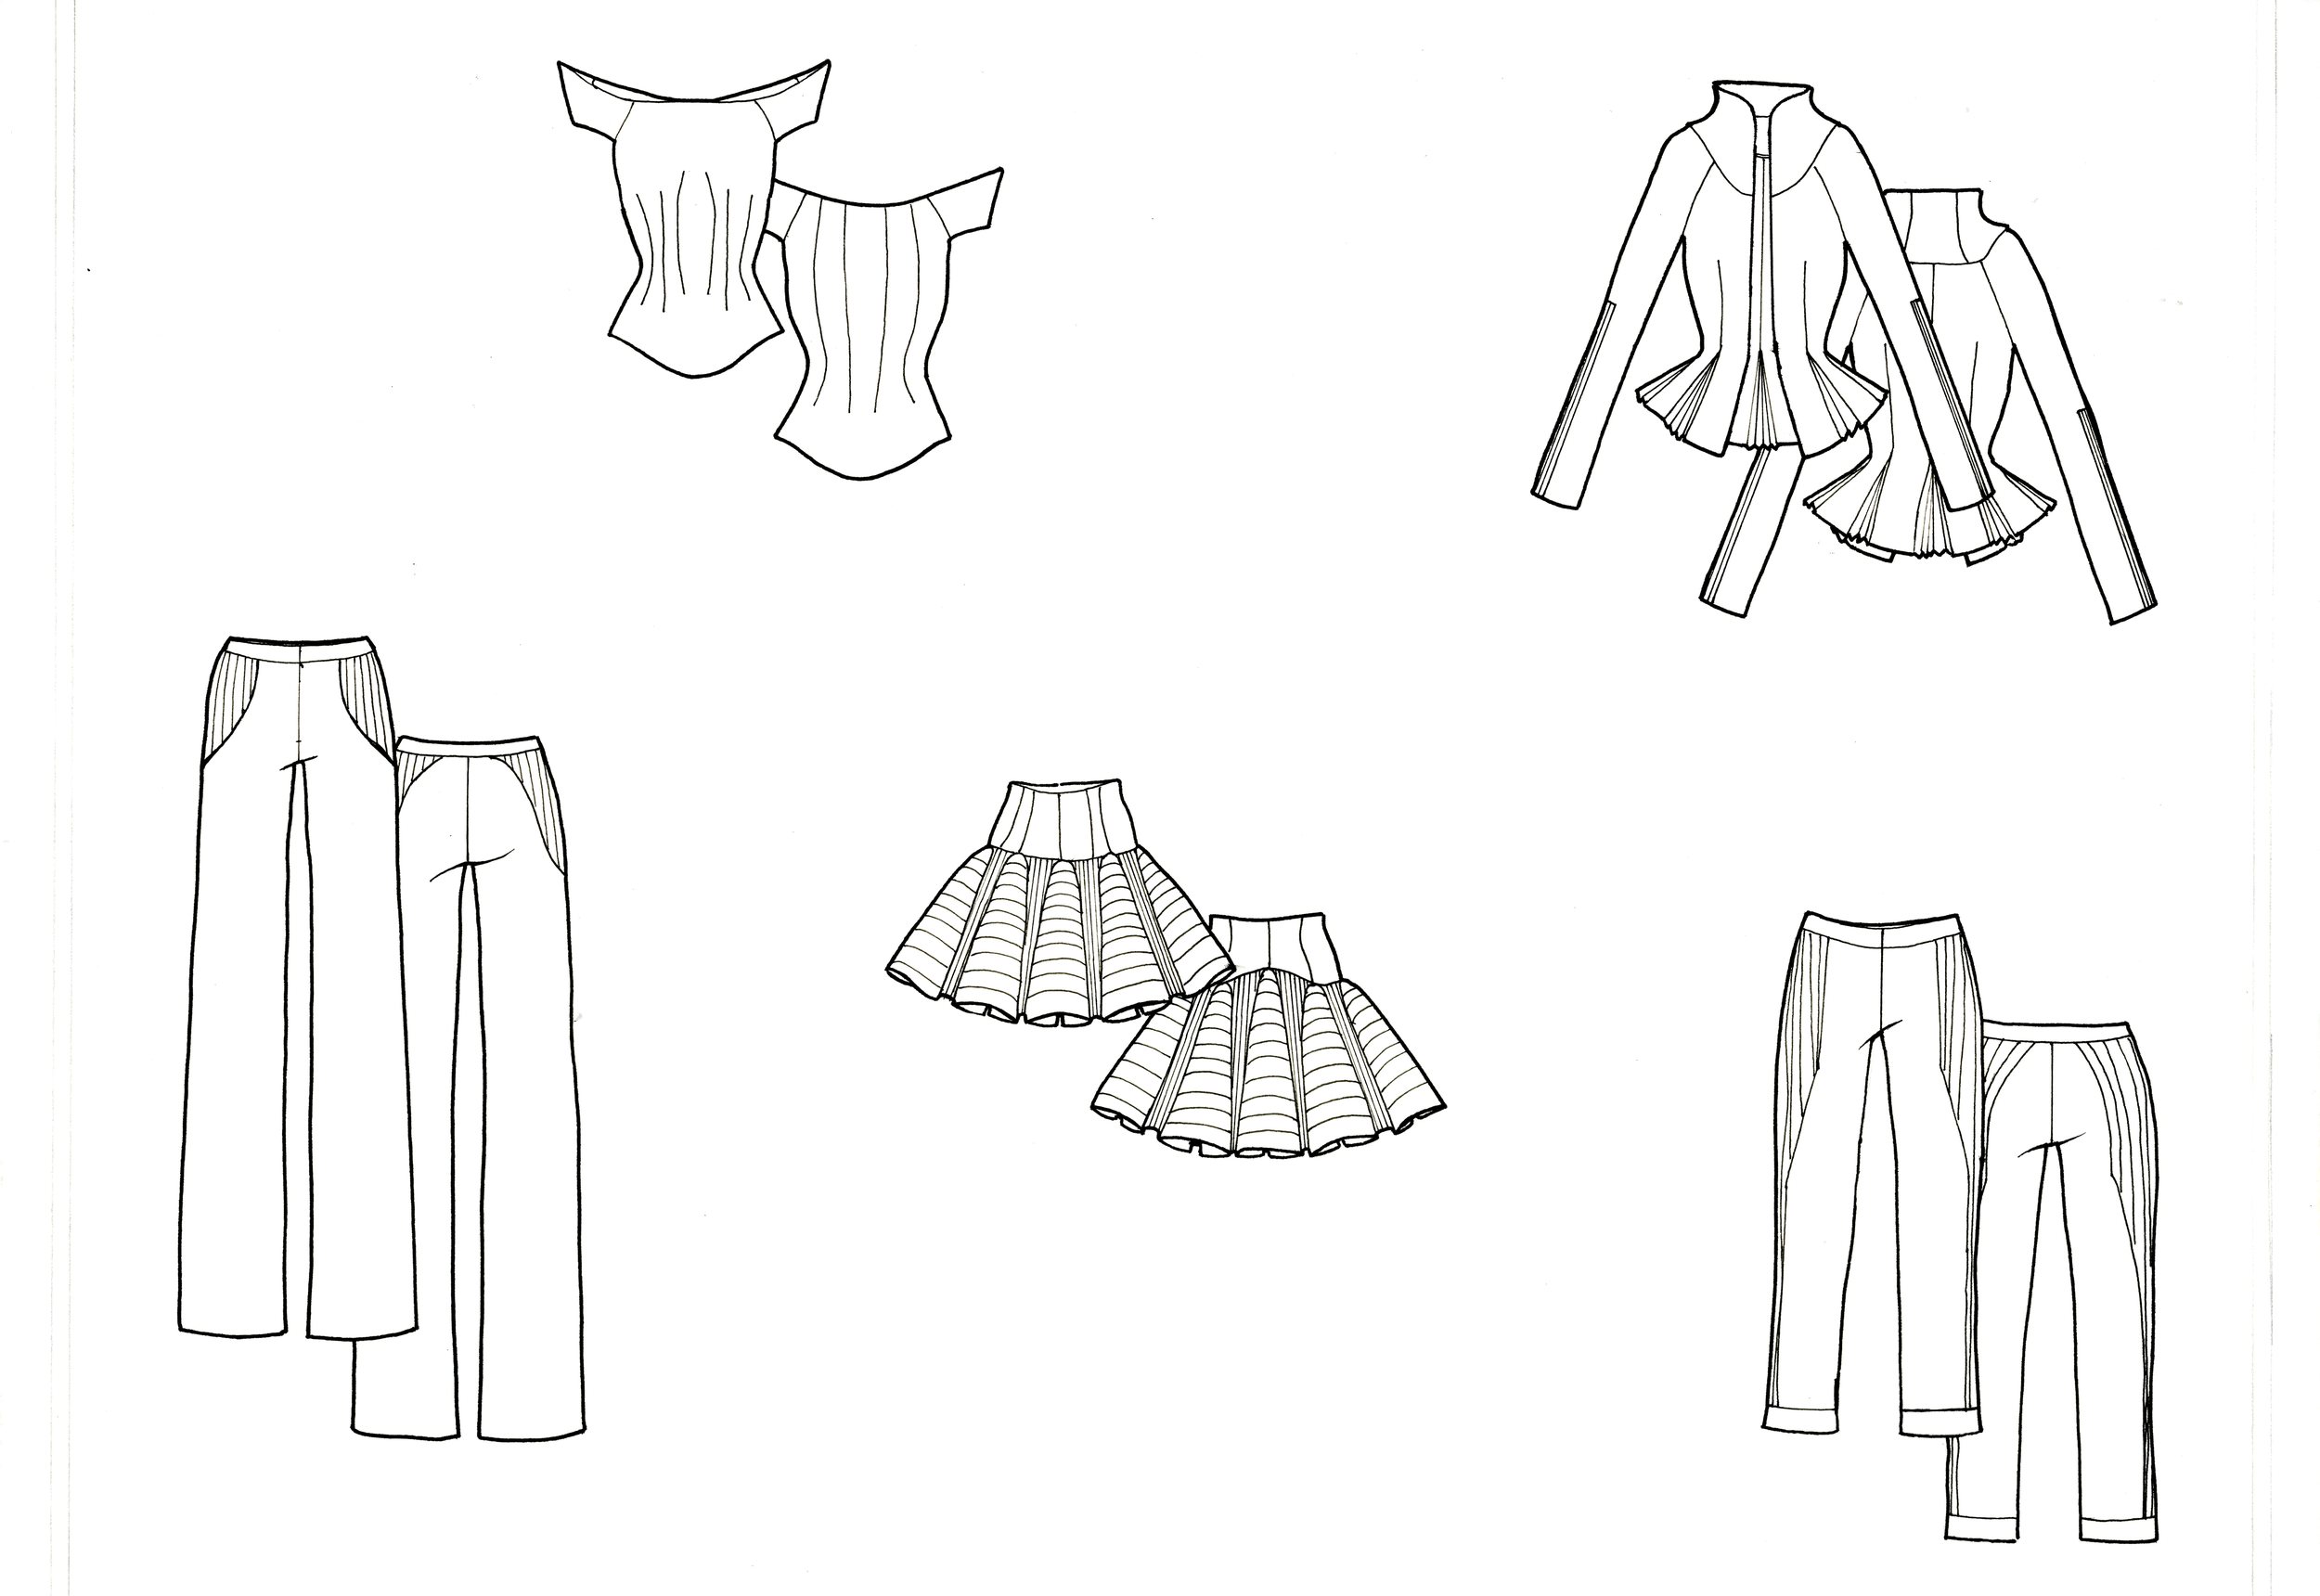 Technical drawings / fashion flat sketches! | Upwork